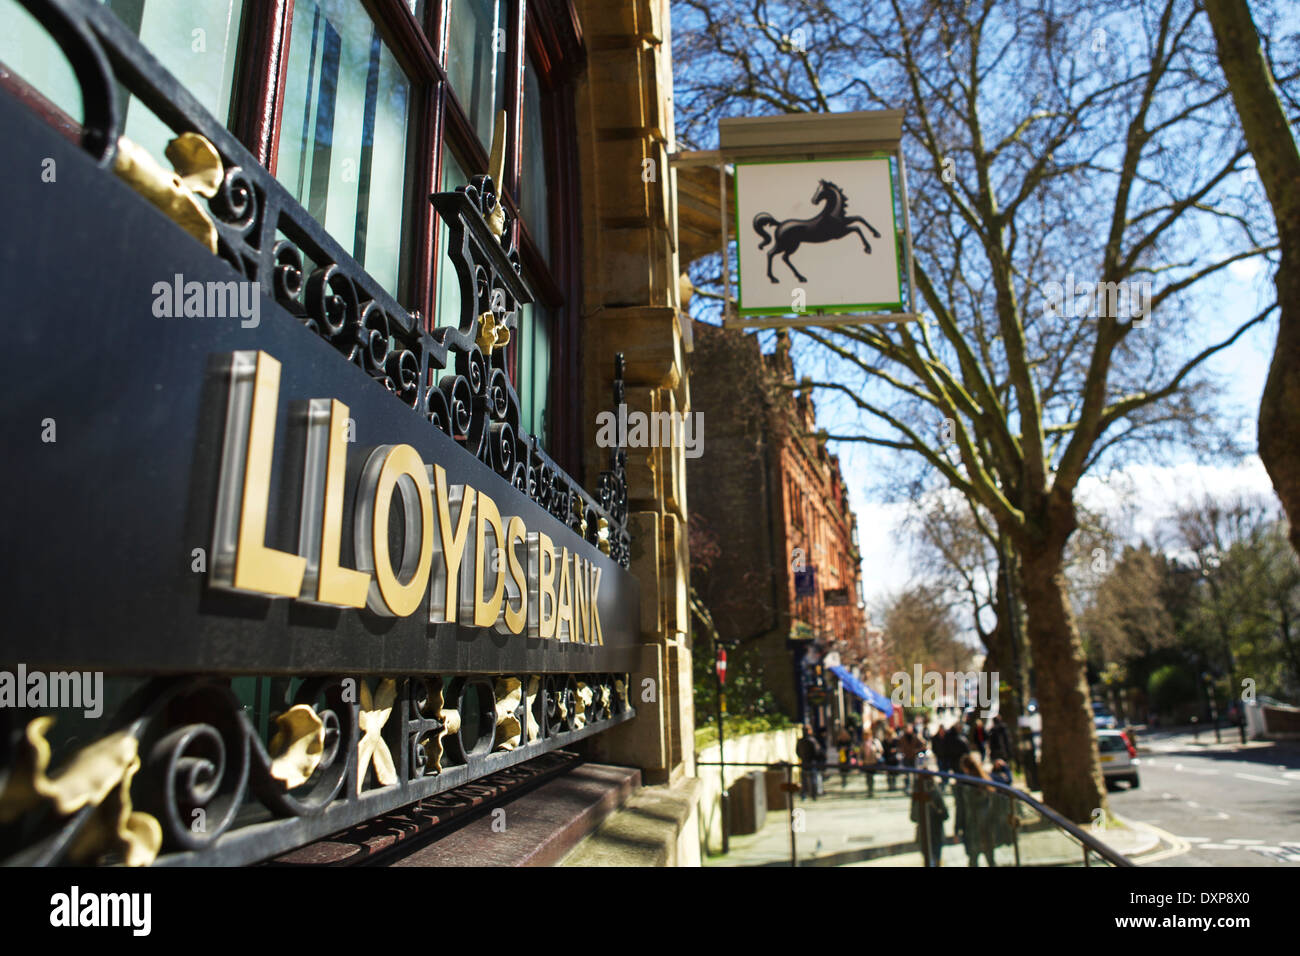 Lloyds Bank branch, sign, and Black Horse sign, Hampstead High St, London, England, UK Stock Photo